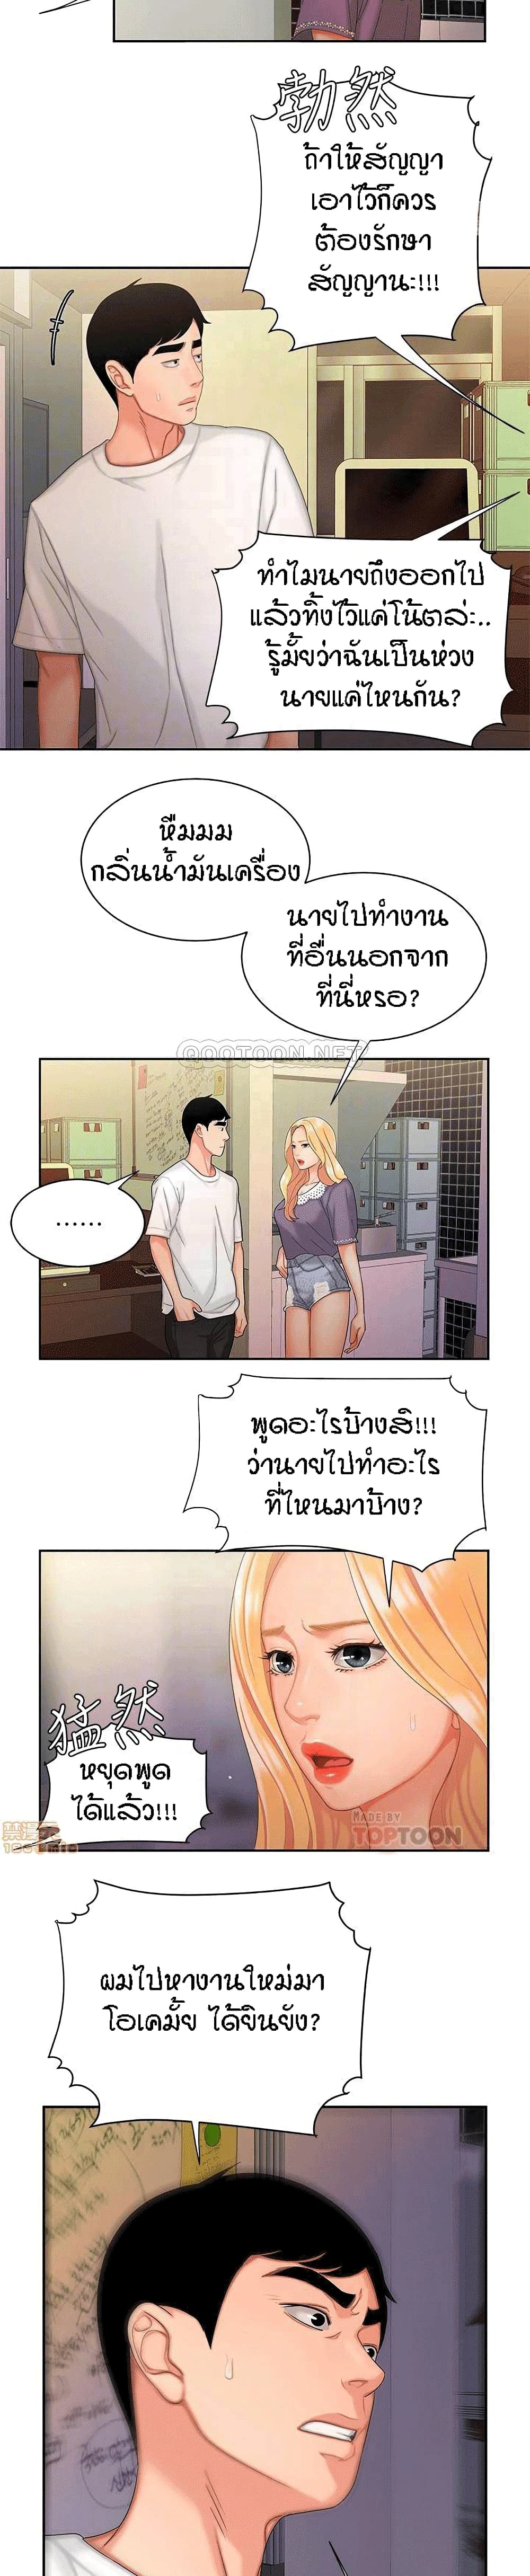 Delivery Man 15 (14)